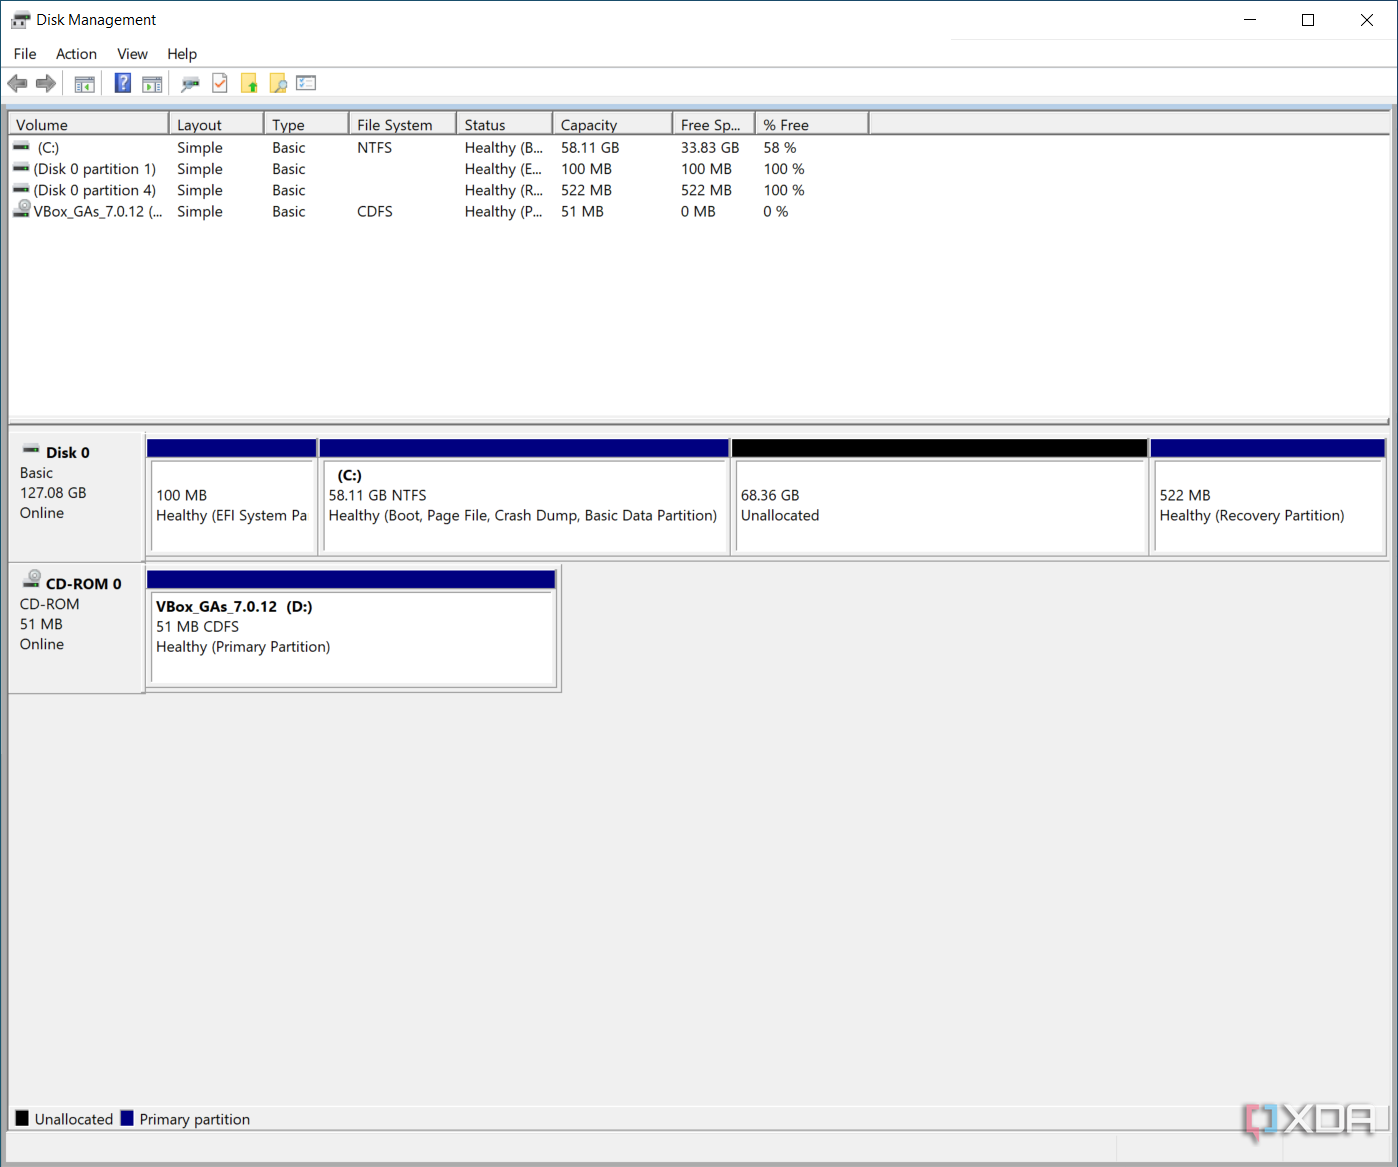 Screenshot of Disk Management showing some unallocated space on the main disk